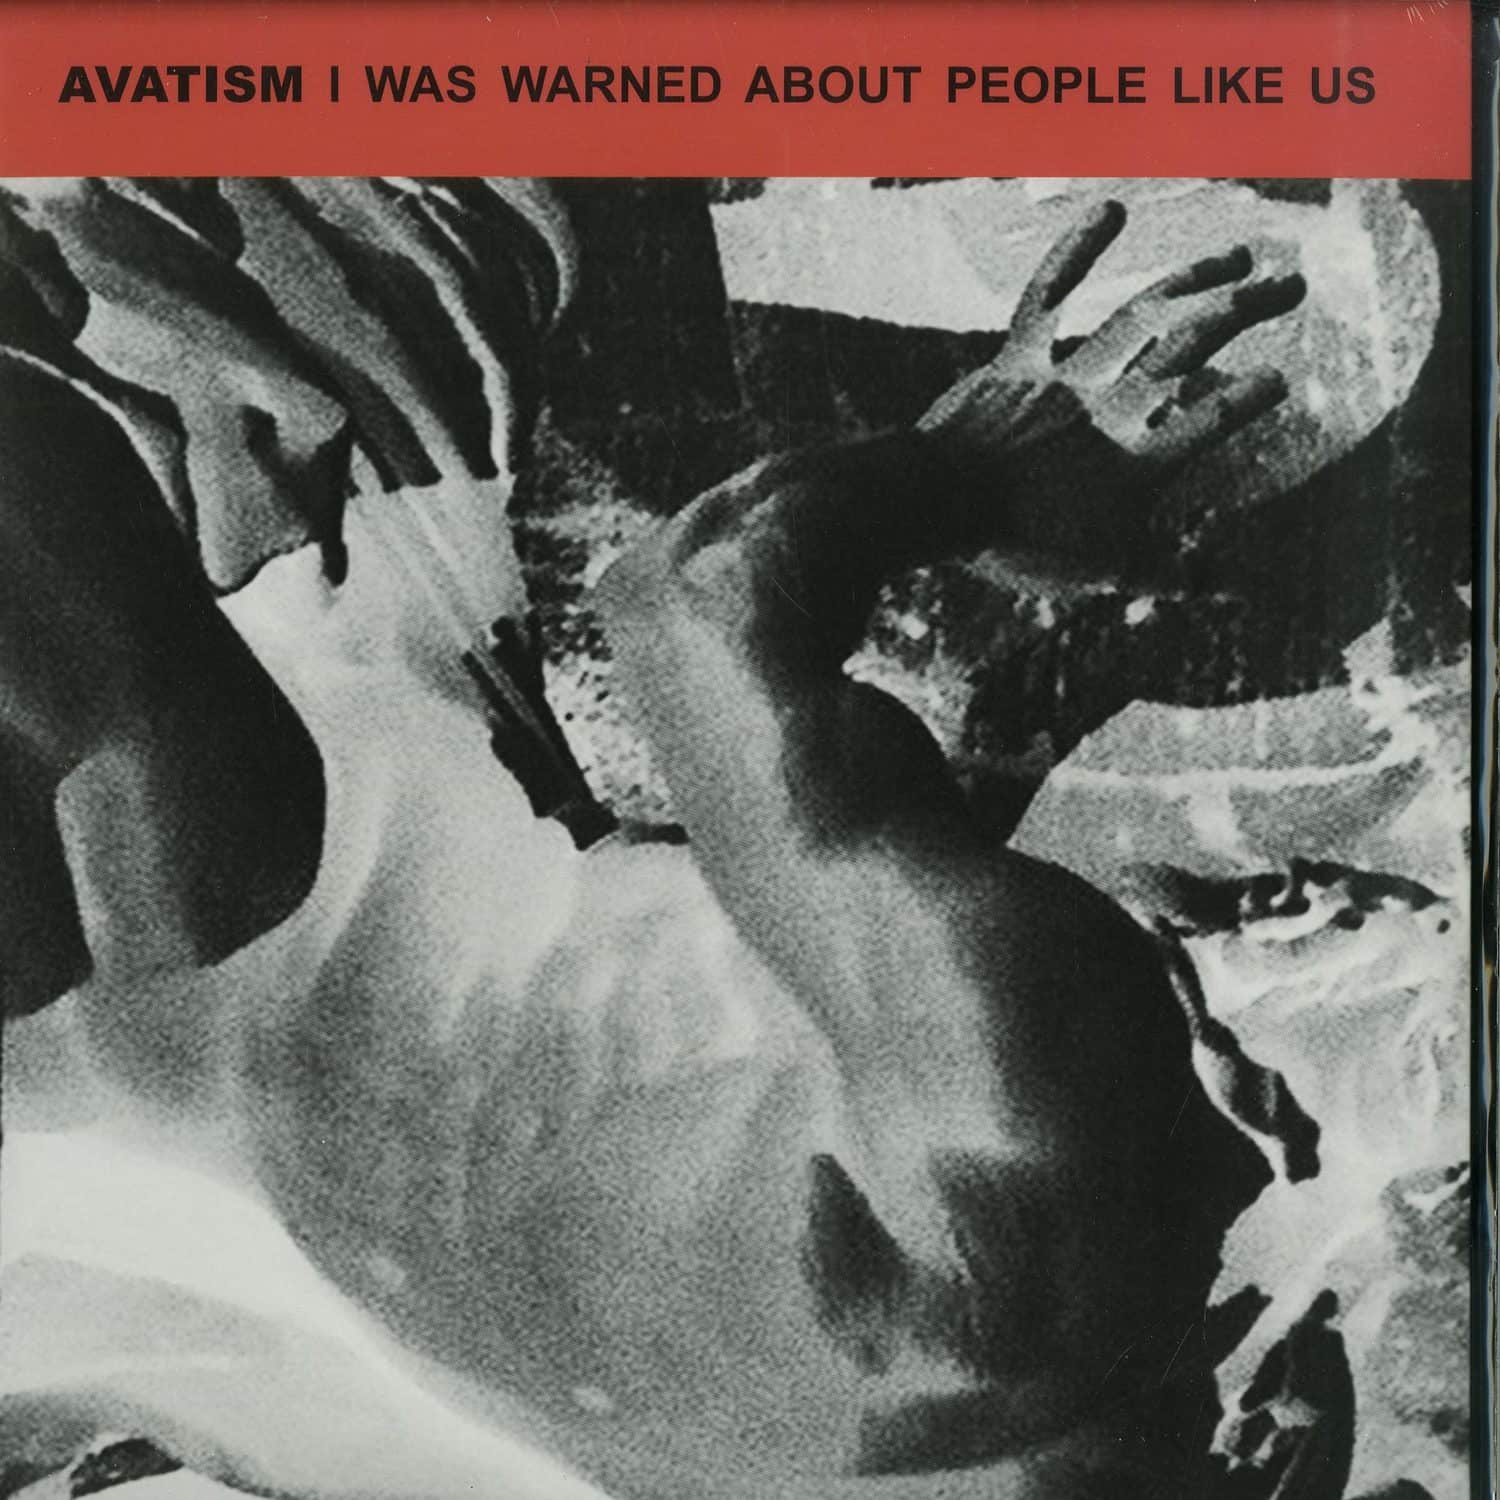 Avatism - I WAS WARNED ABOUT PEOPLE LIKE US